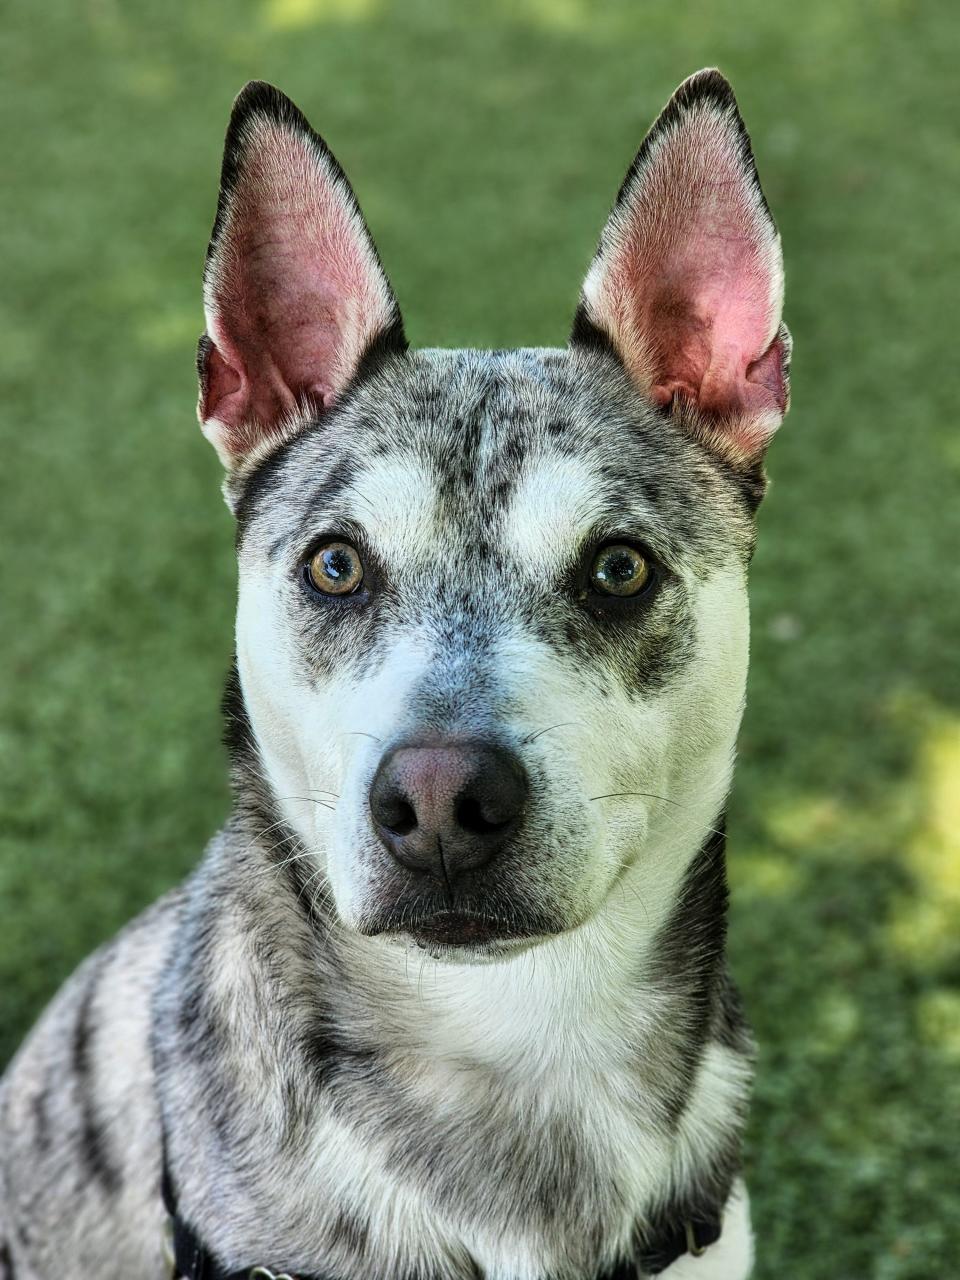 Rio is a 2-year-old medium-size northern breed mix. He loves to play in the yard with all his dog friends and is very friendly meeting new people. To meet Rio, call 405-216-7615 or visit the Edmond Animal Shelter at 2424 Old Timbers Drive in Edmond during open hours.